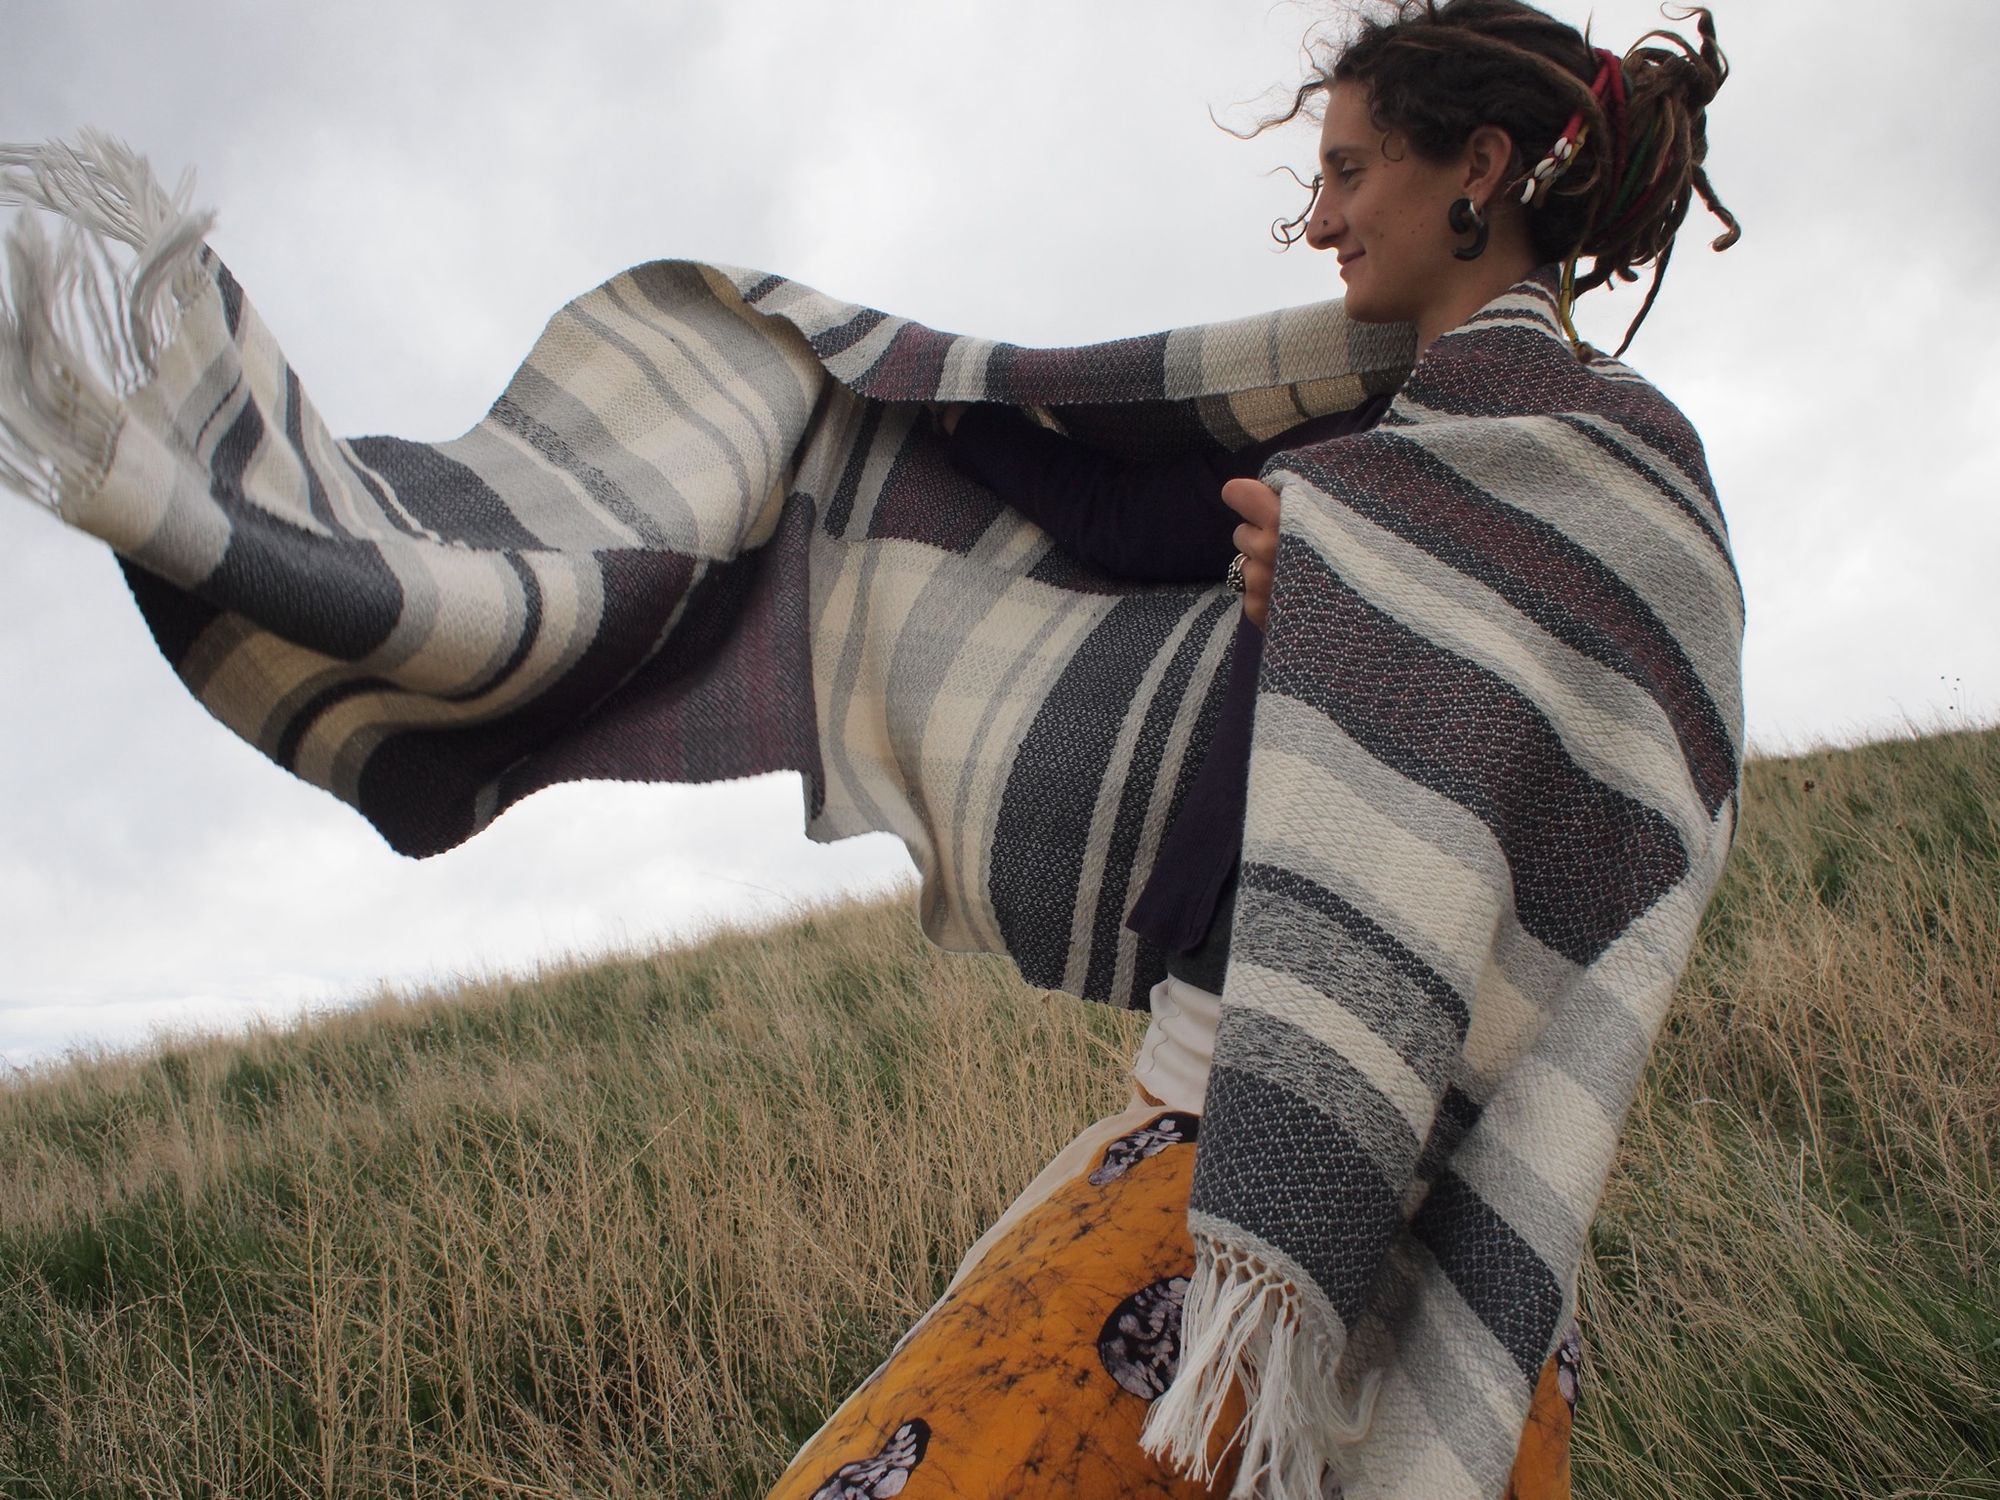 Woman wearing a dark grey, maroon and white blanket standing on a green grassy hill. The blanket is blowing in the wind. 